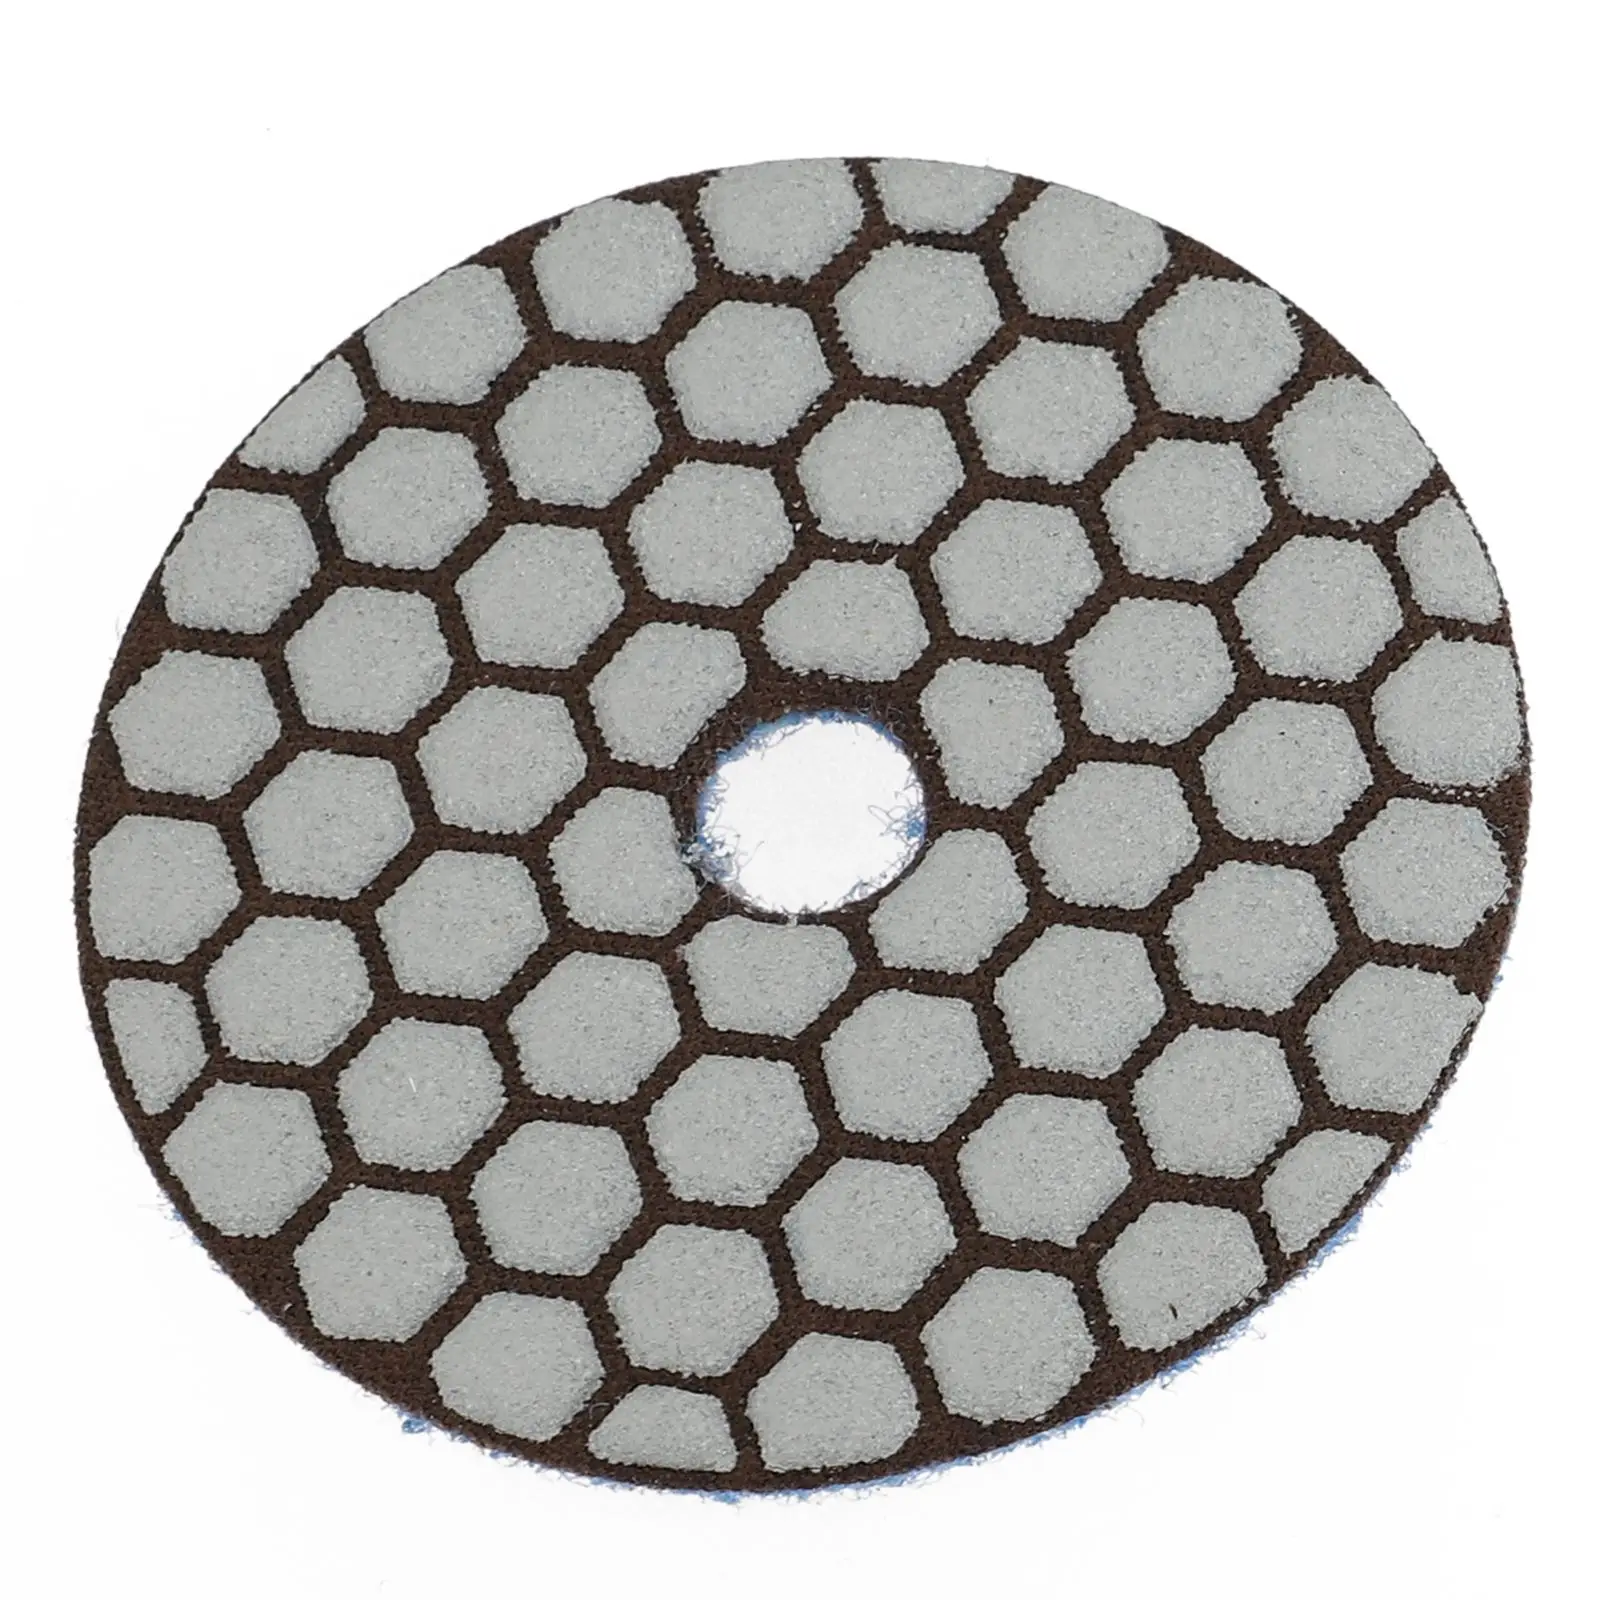 Durable Polishing Pad Polishing Tool 1pc 3Inch Diamond Dry For Granite Marble Grinding Polishing Pad Polishing With 3inch lcd 69 03a53 g01 new and original lms350gf18 rev0 1 lcd 3 5 inch tft with touch panel display screen